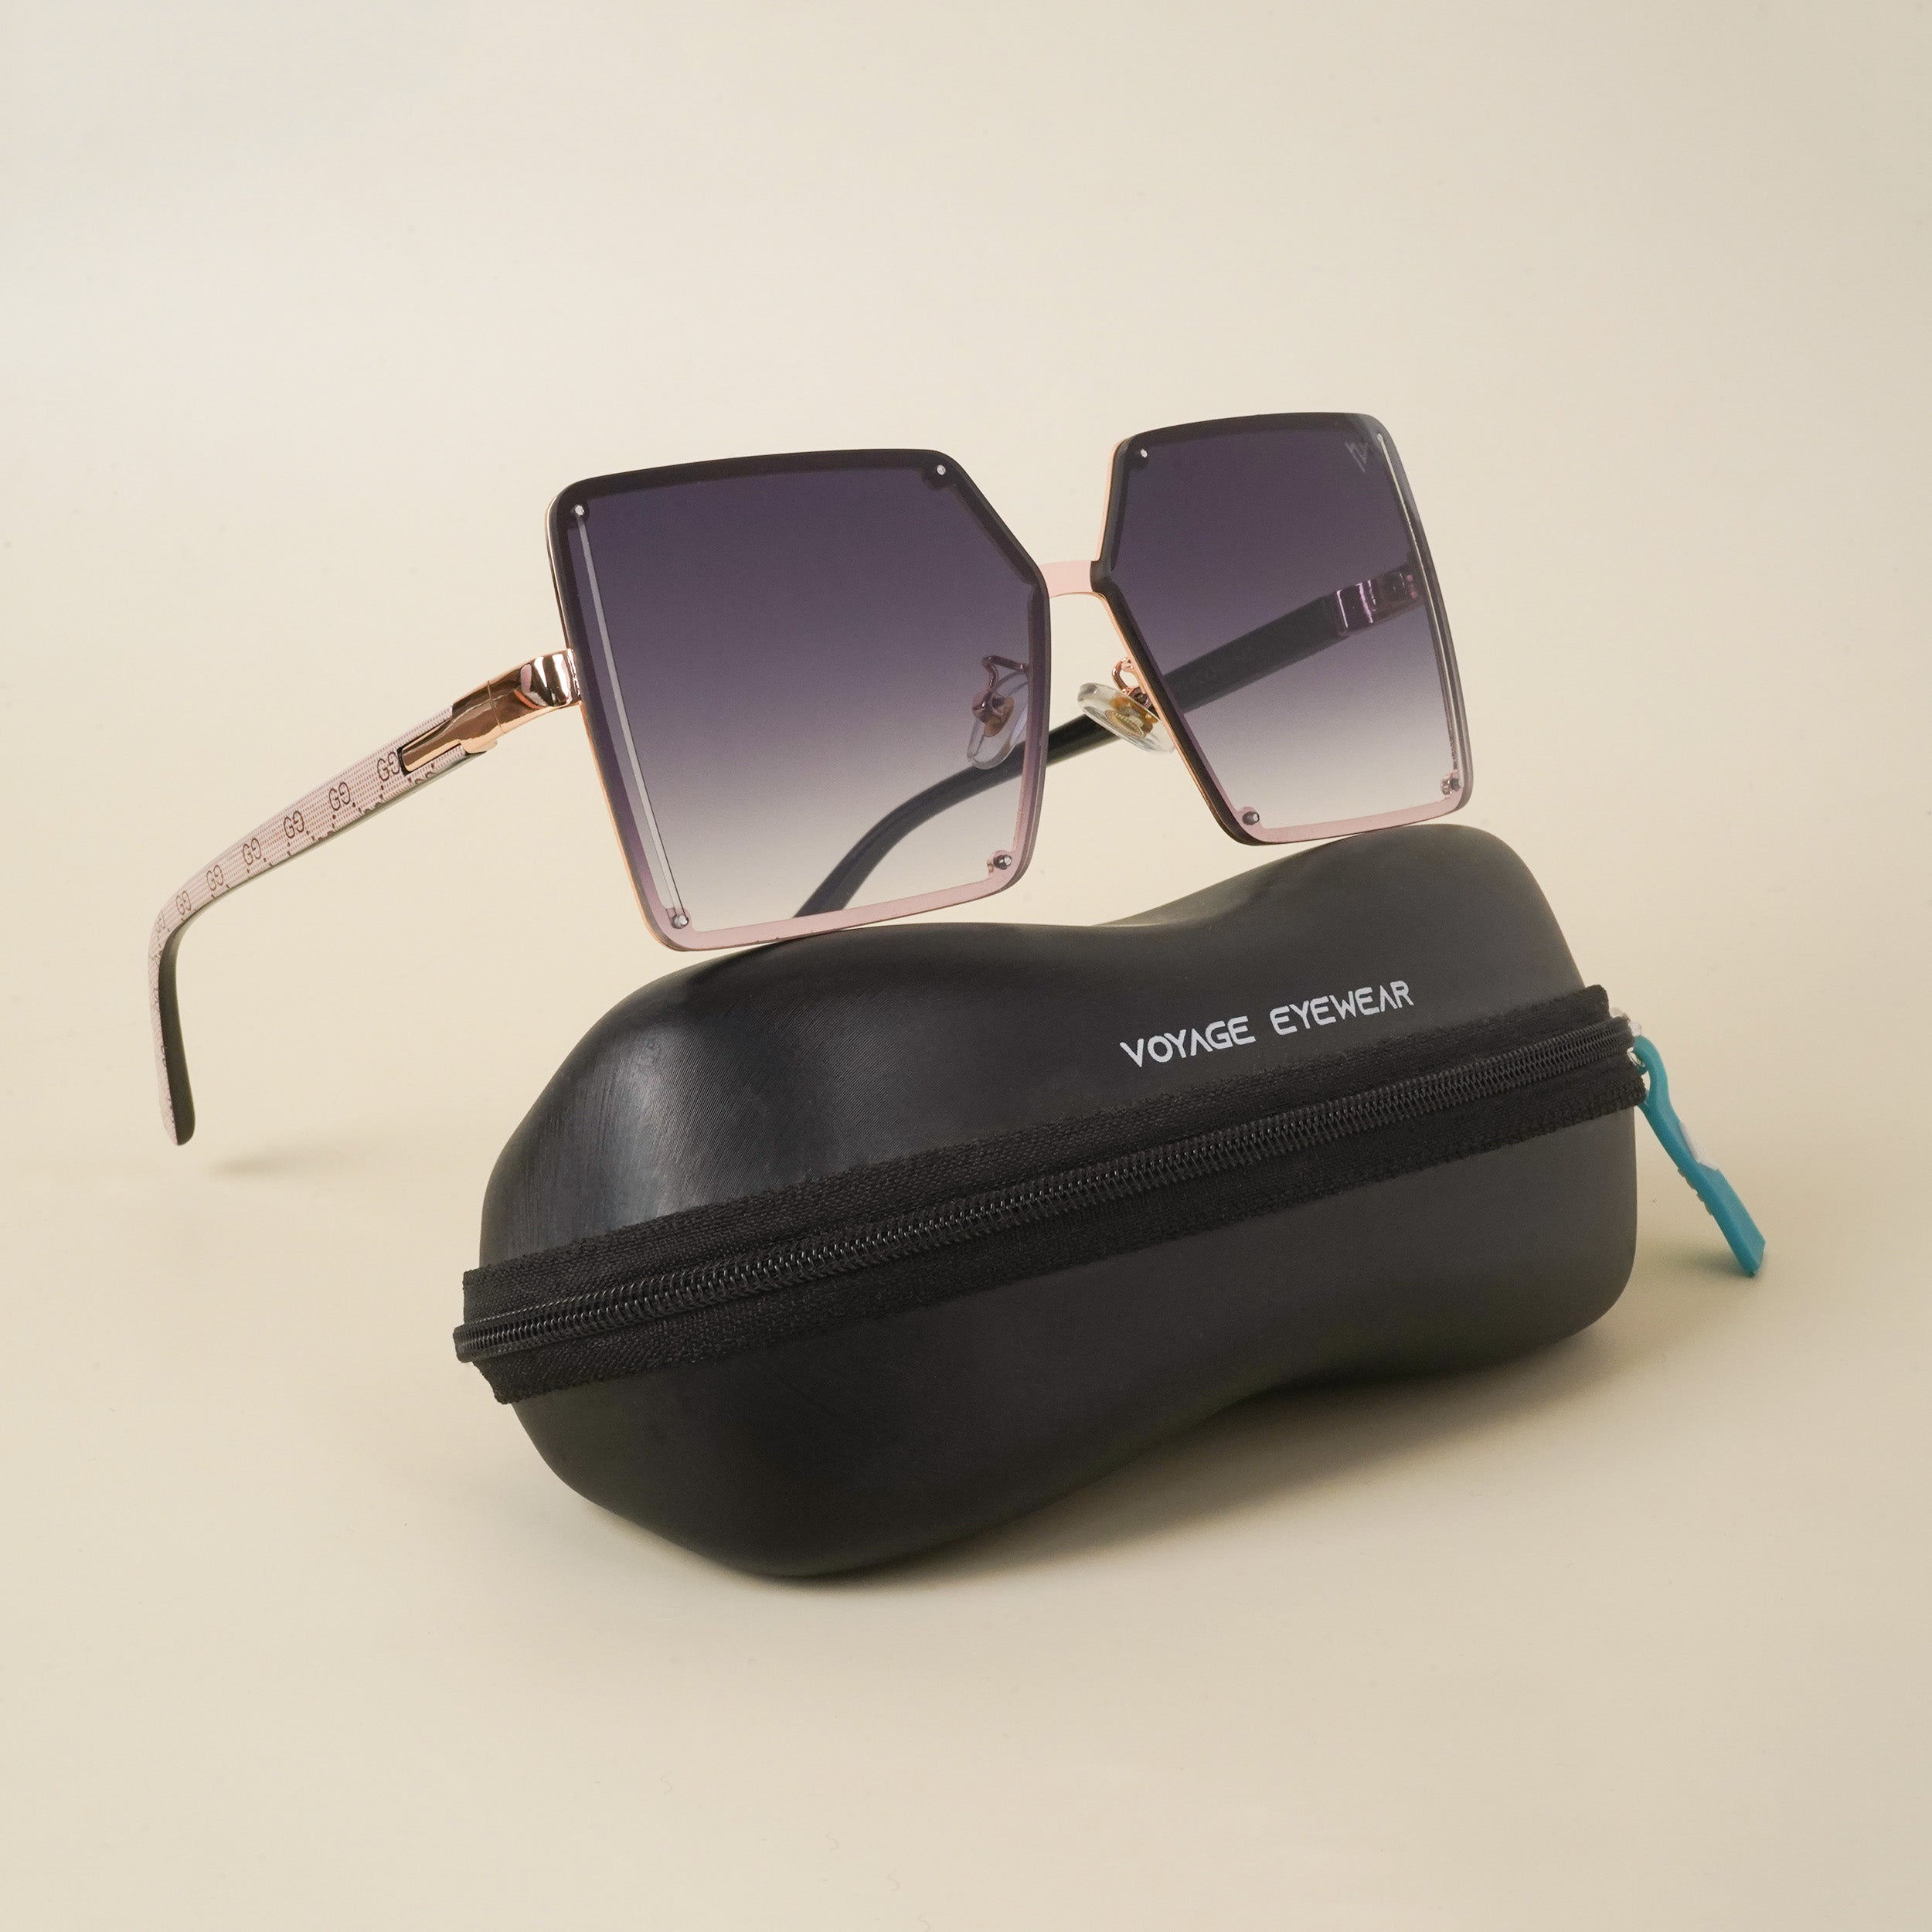 Voyage Black Over Size Sunglasses for Women - MG3957